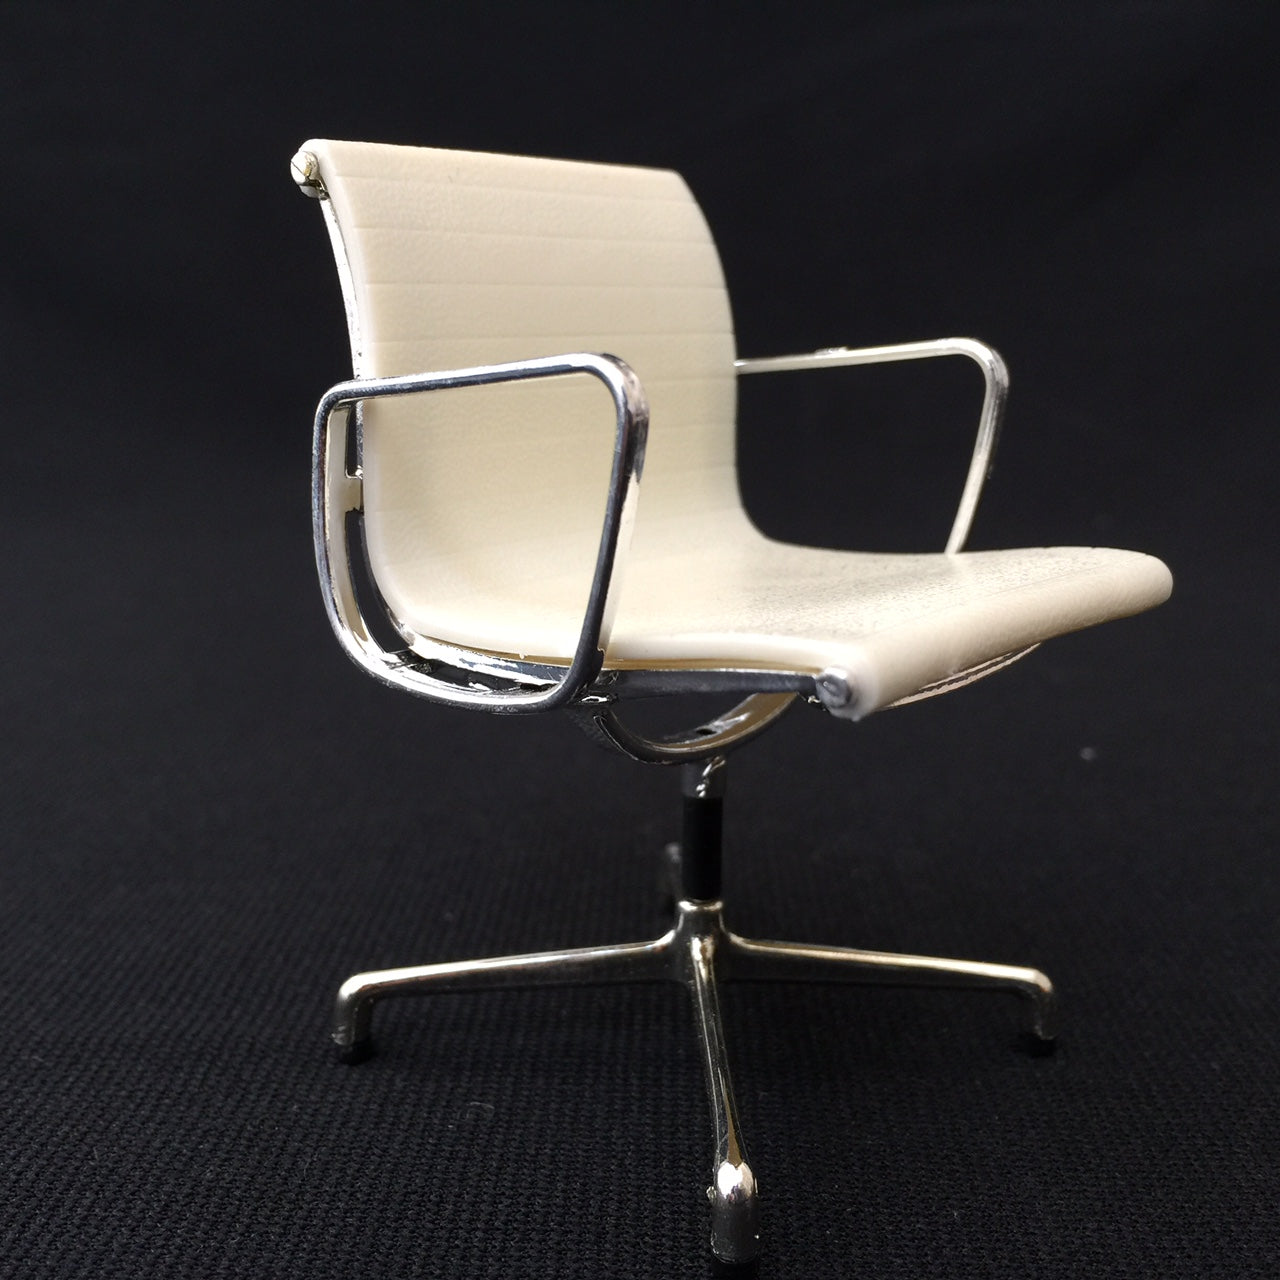 X 75148 Miniature Office Chair White-DISCONTINUED